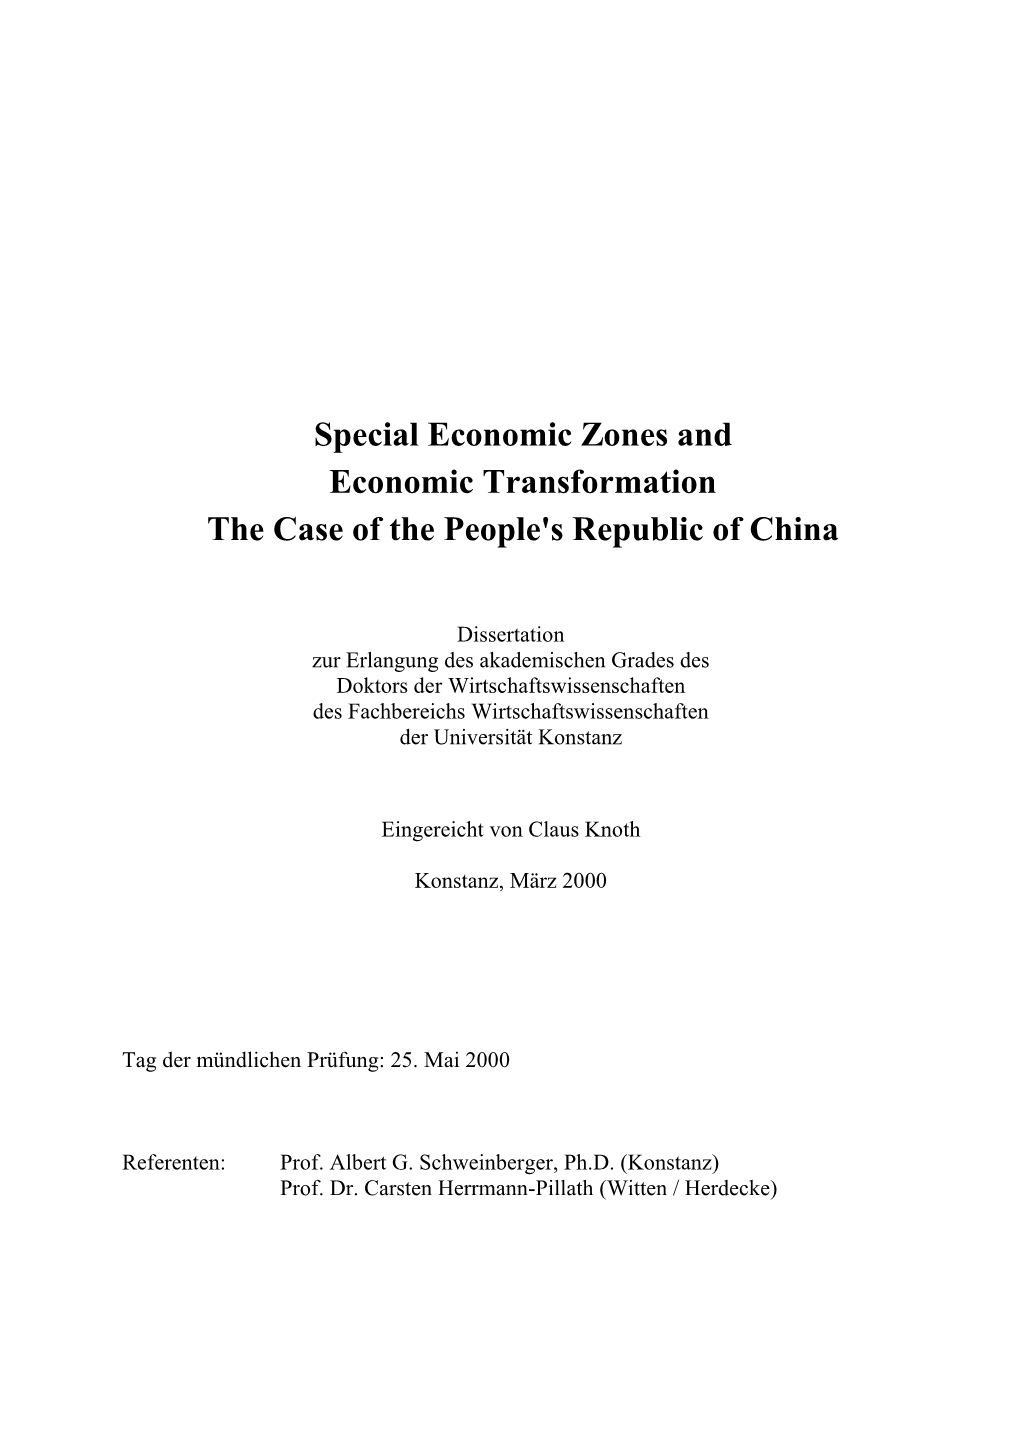 Special Economic Zones and Economic Transformation the Case of the People's Republic of China